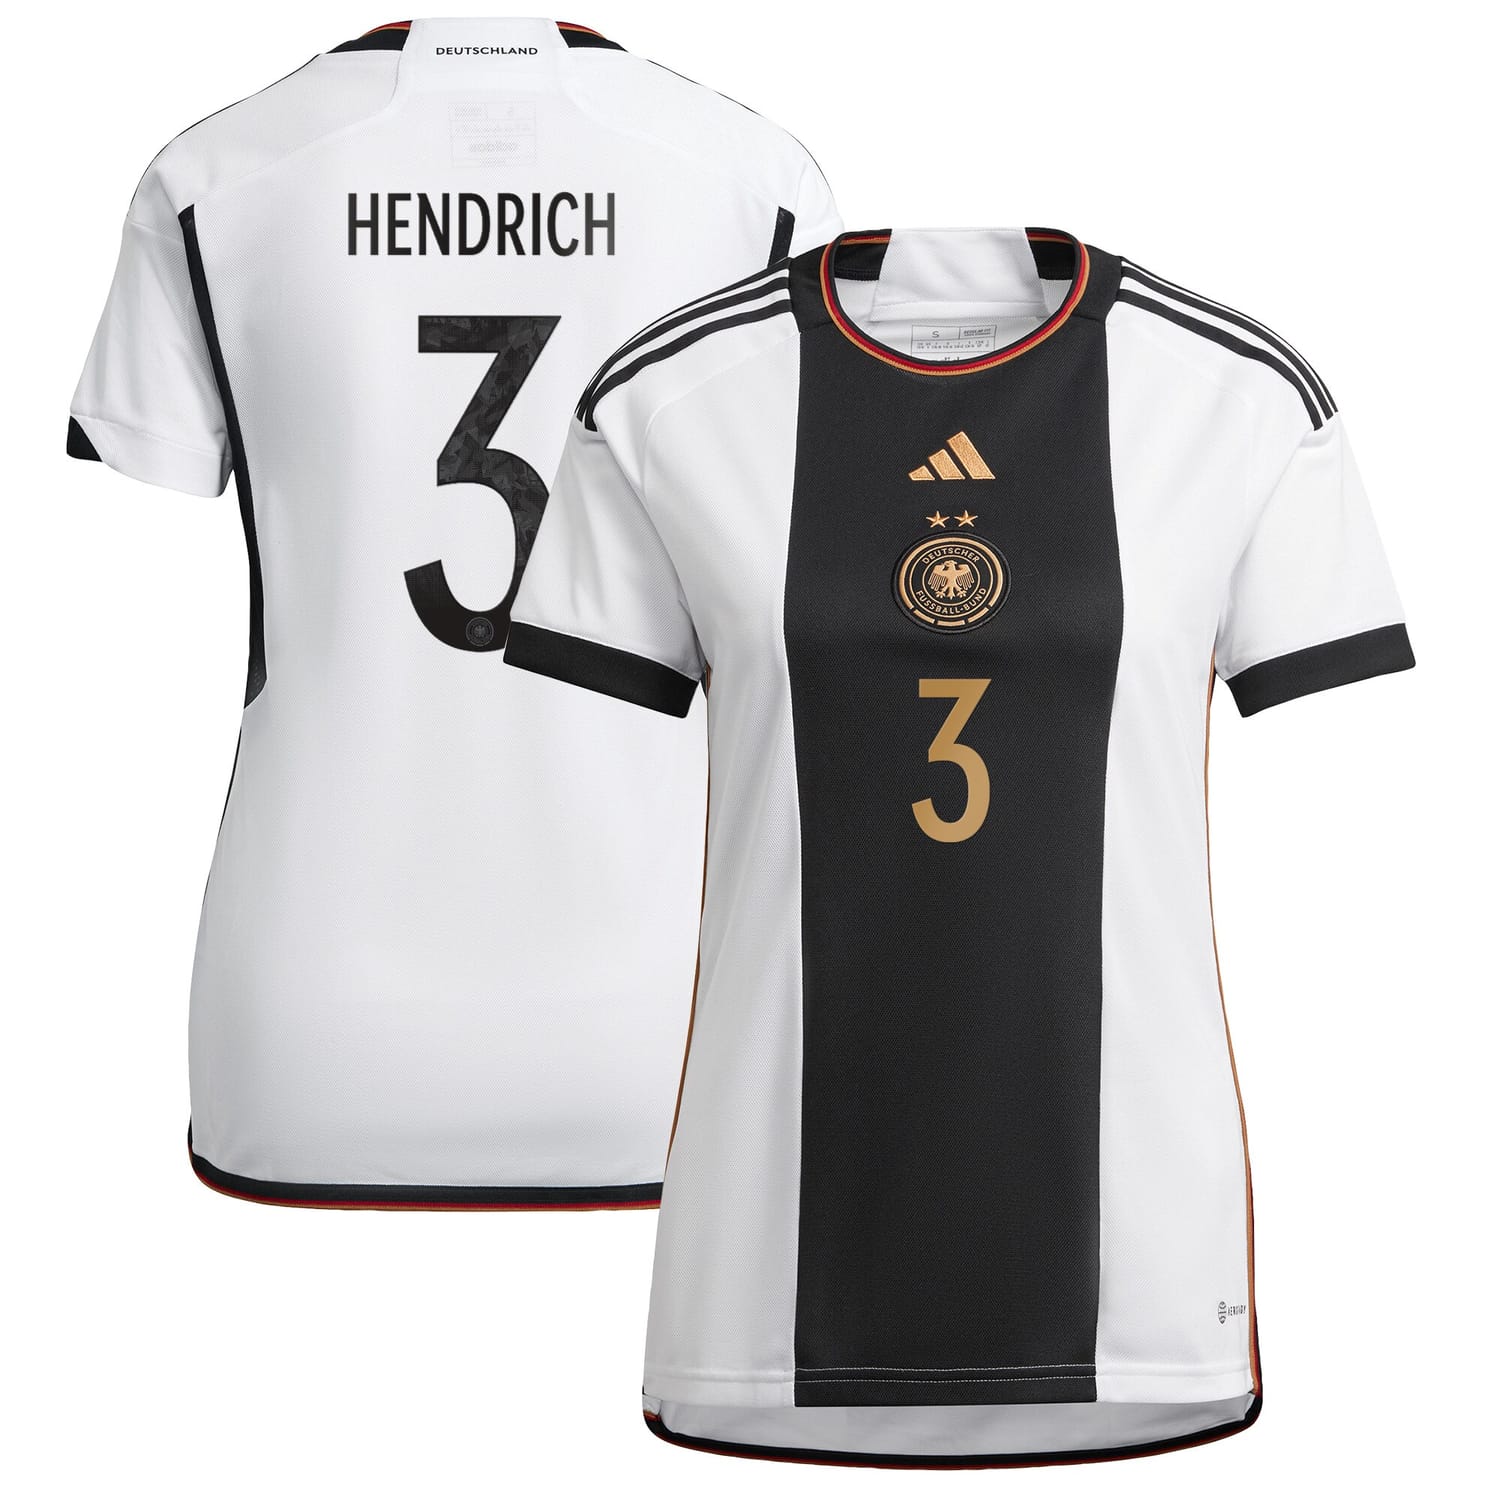 Germany National Team Home Jersey Shirt player Kathrin Hendrich 3 printing for Women